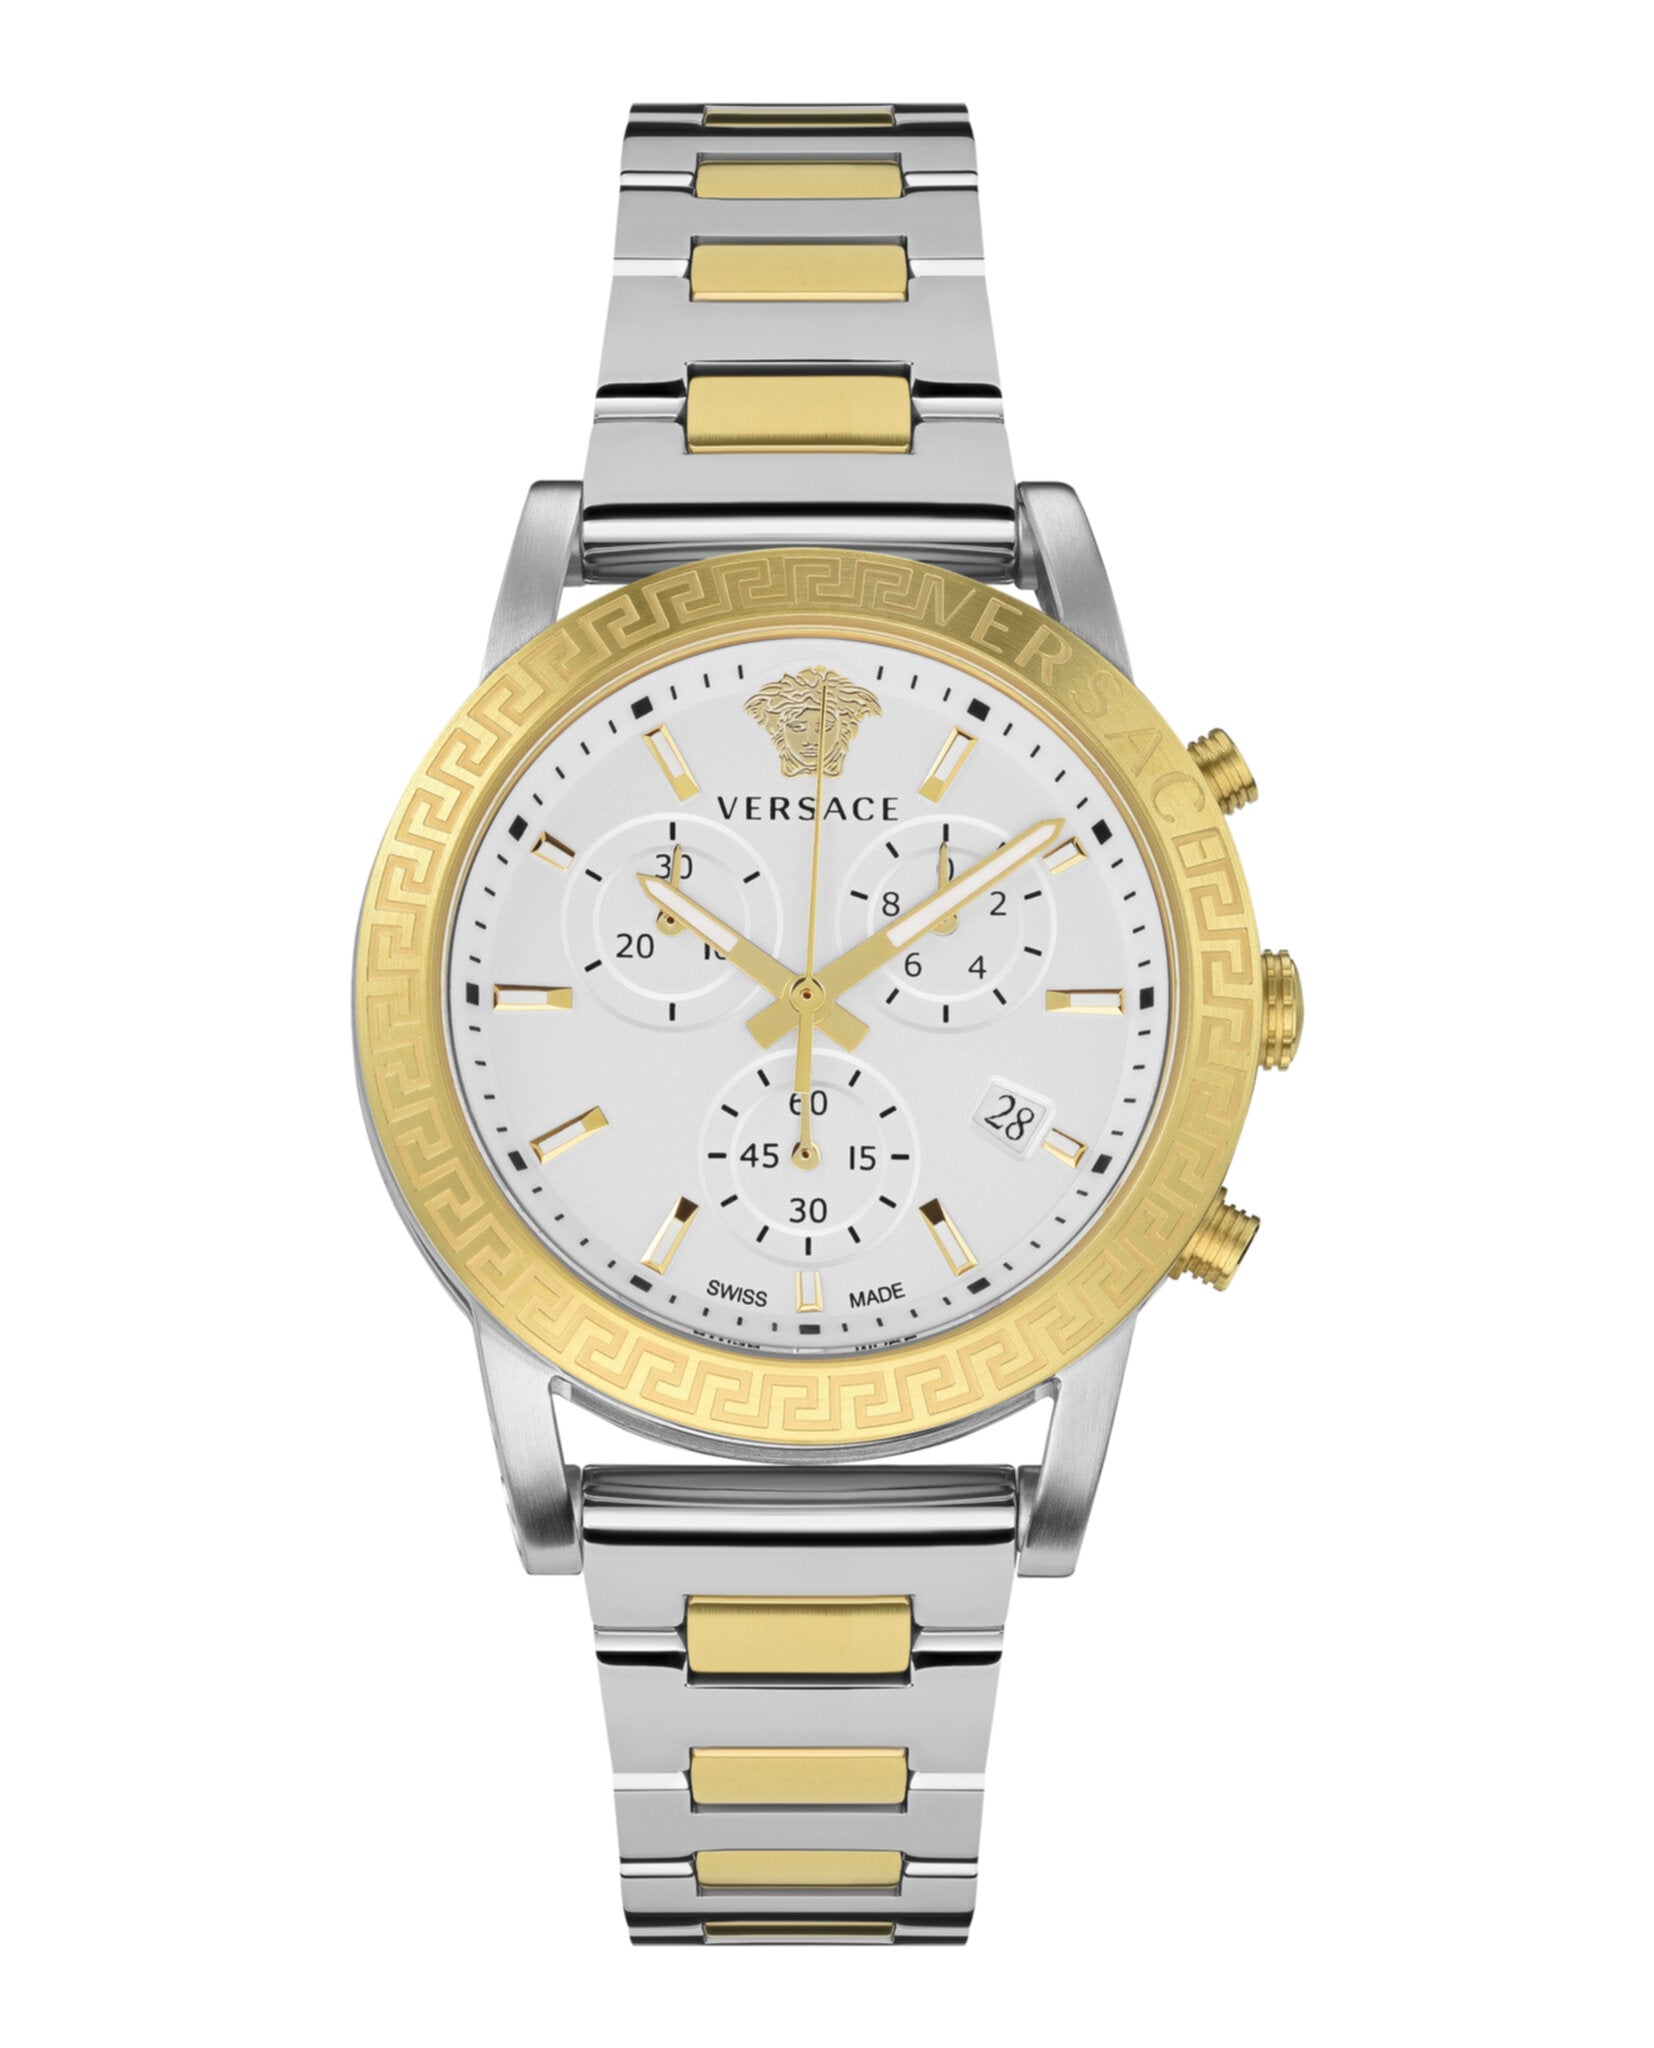 Time Sport Tech Watches Womens Versace | MadaLuxe Madaluxe – Time